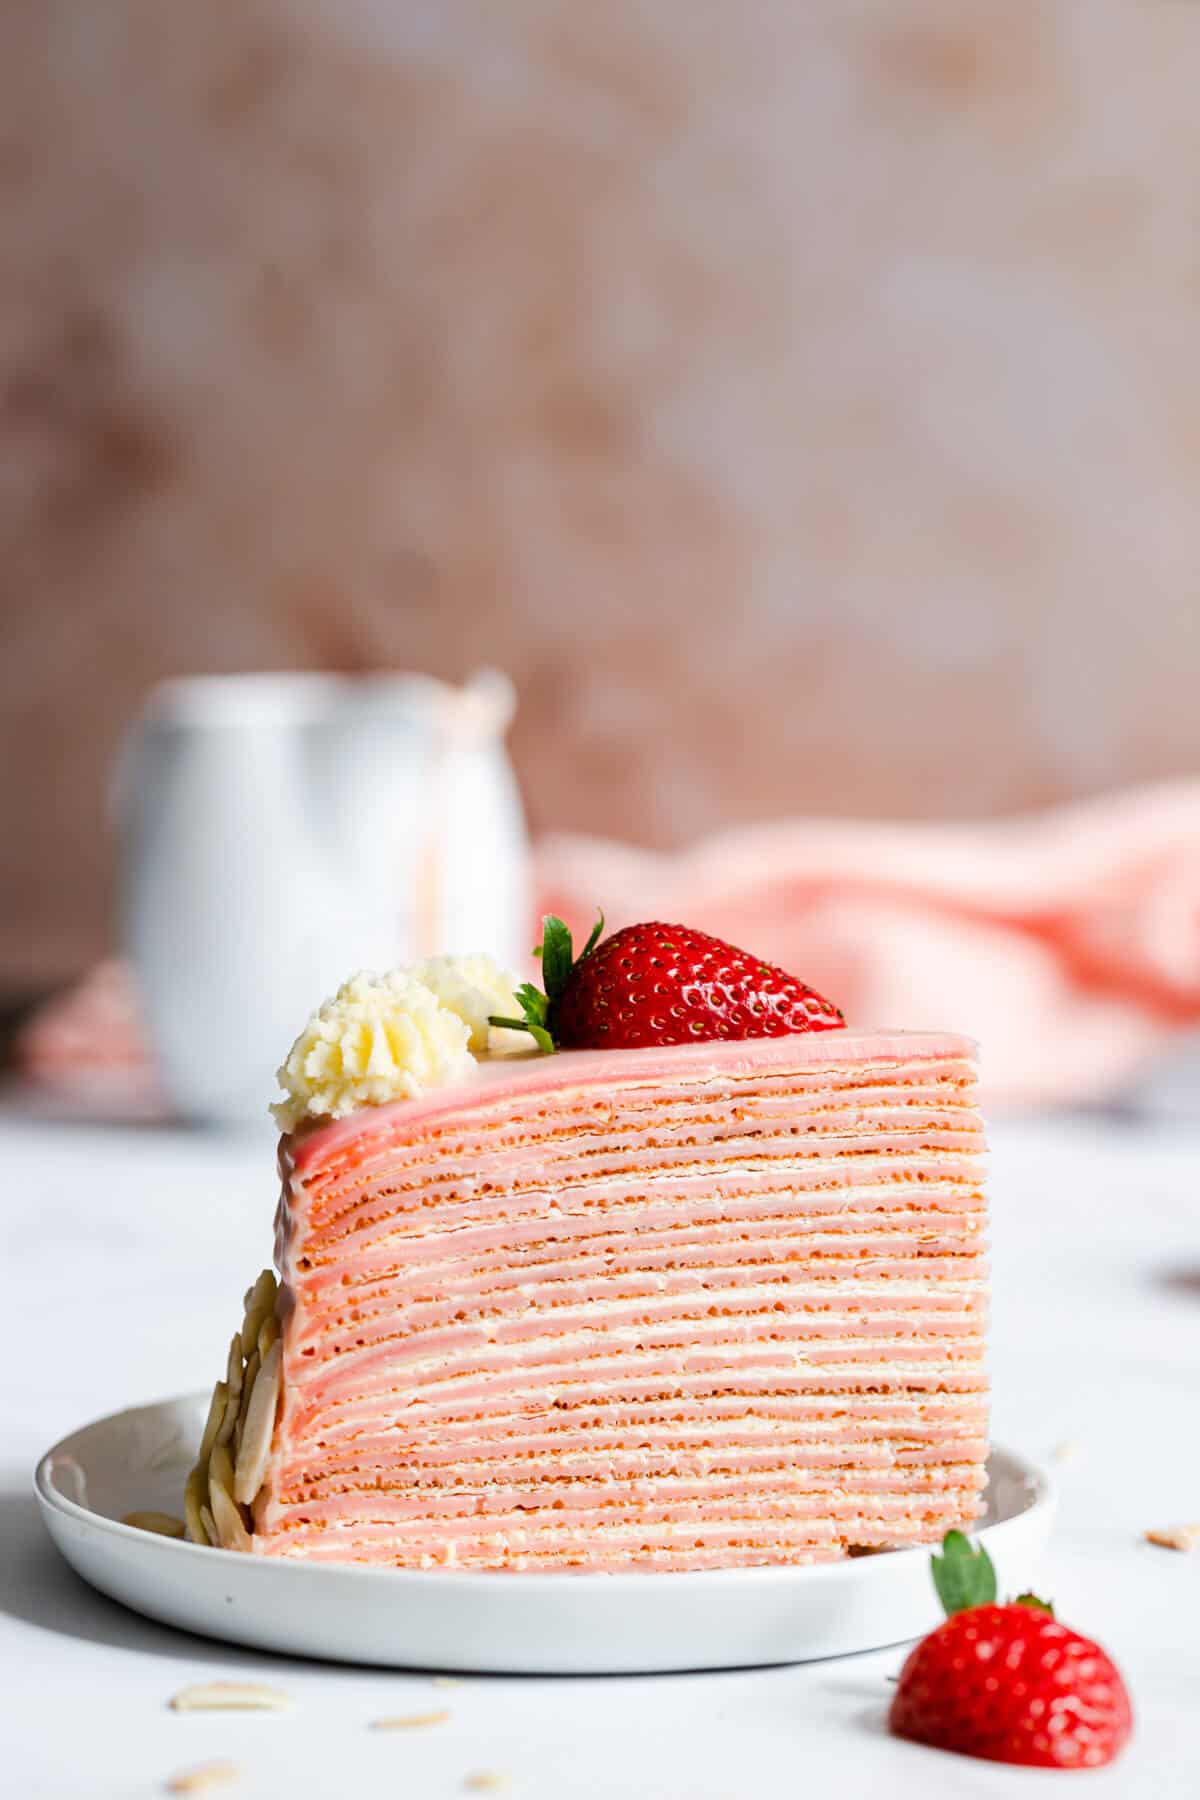 super close up of a slice of crepe cake on a small plate